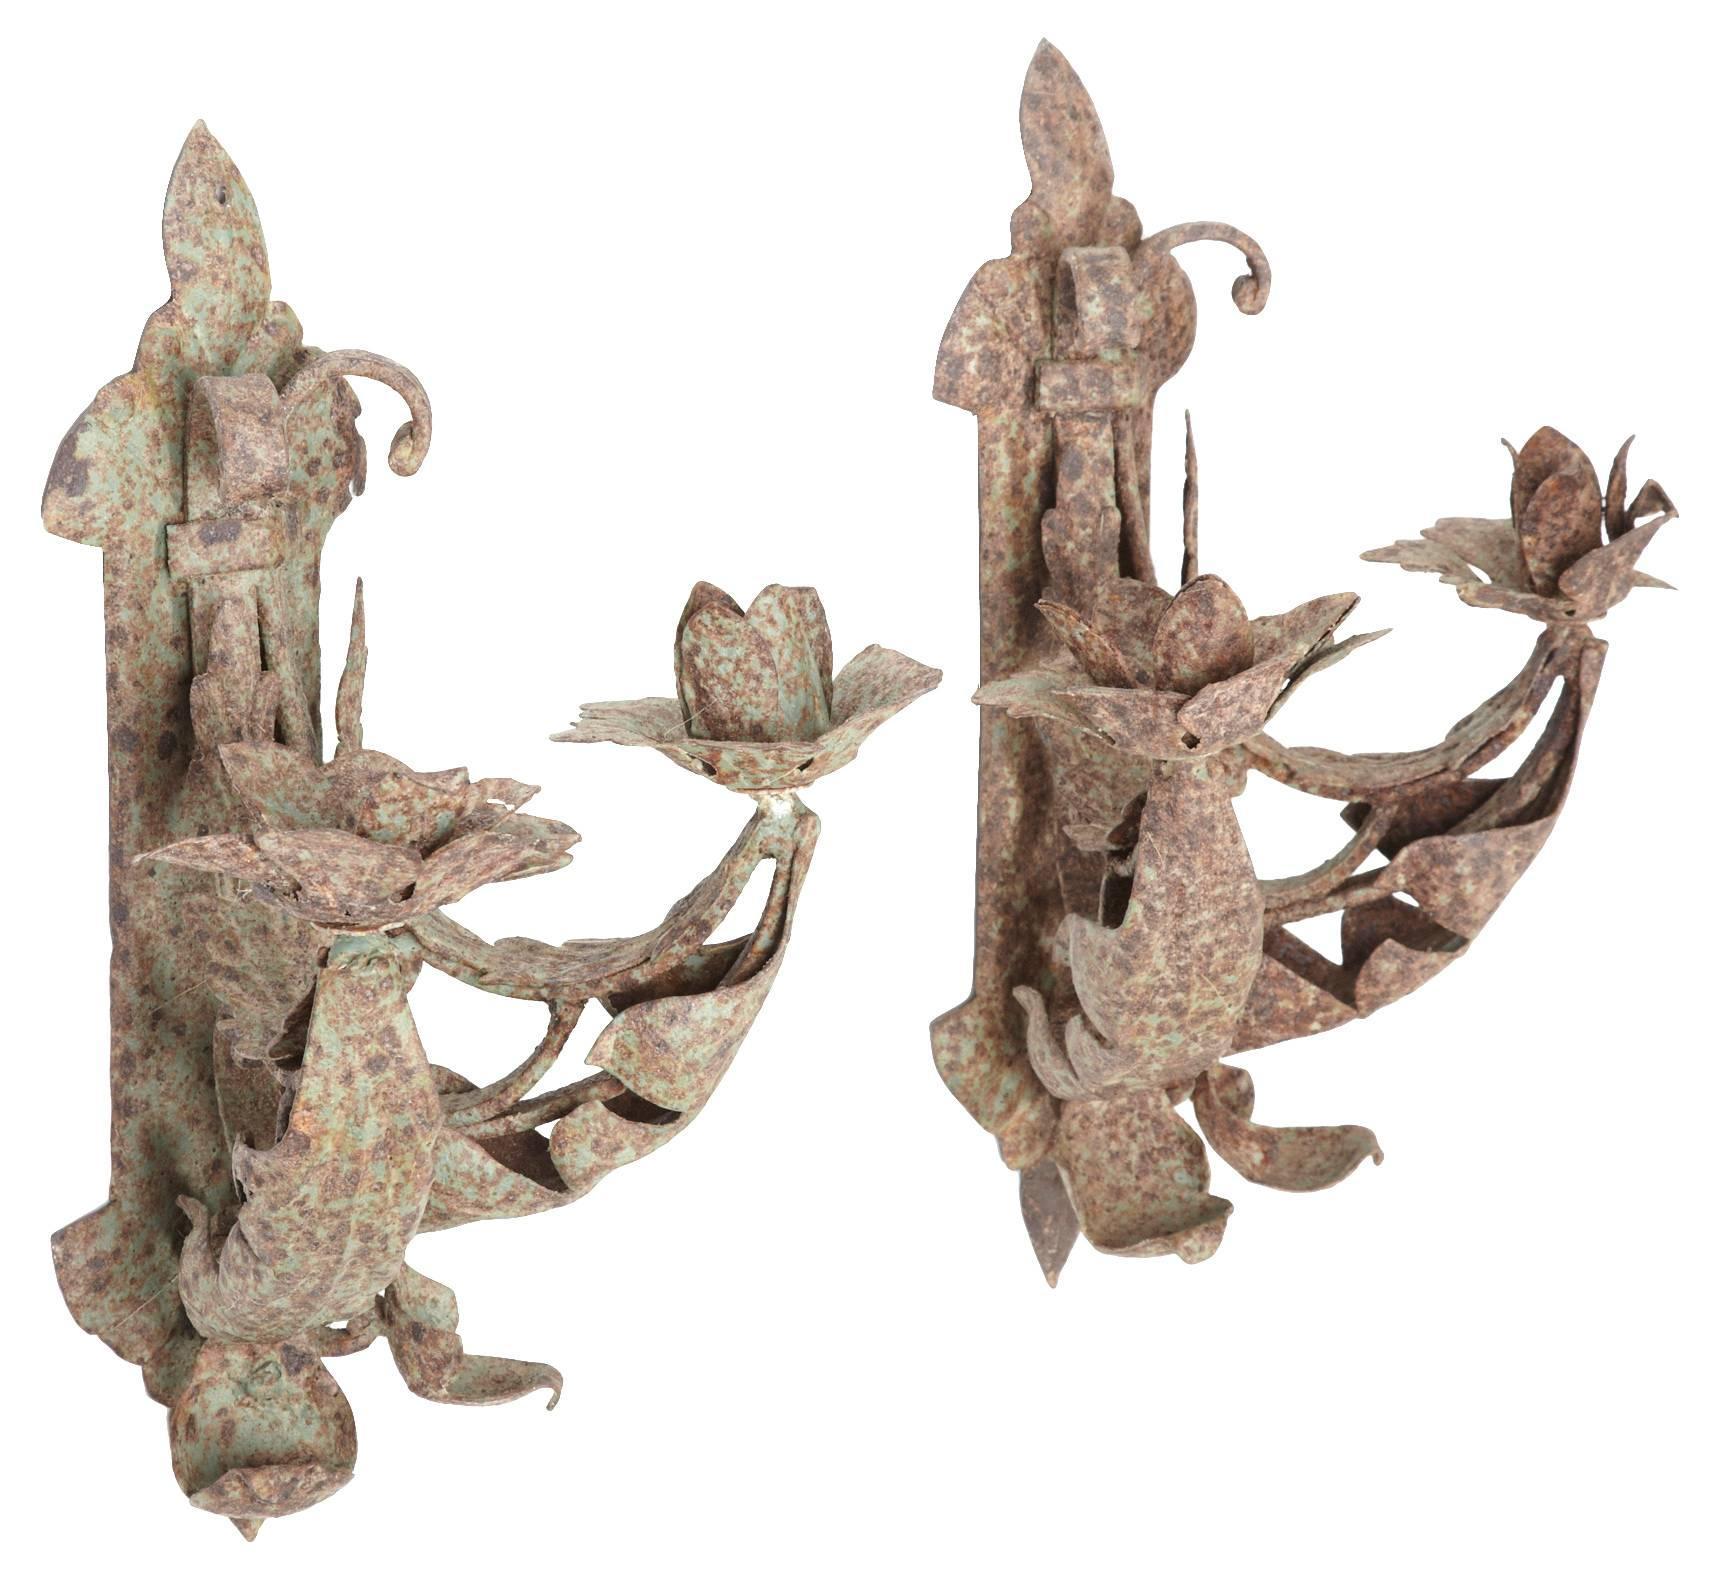 The pair of antique handcrafted iron sconces are decorated with various forms of leaves and are secured by brackets, each with a hole at the top for attaching a screw or nail to a wall. Each sconce holds two candles.